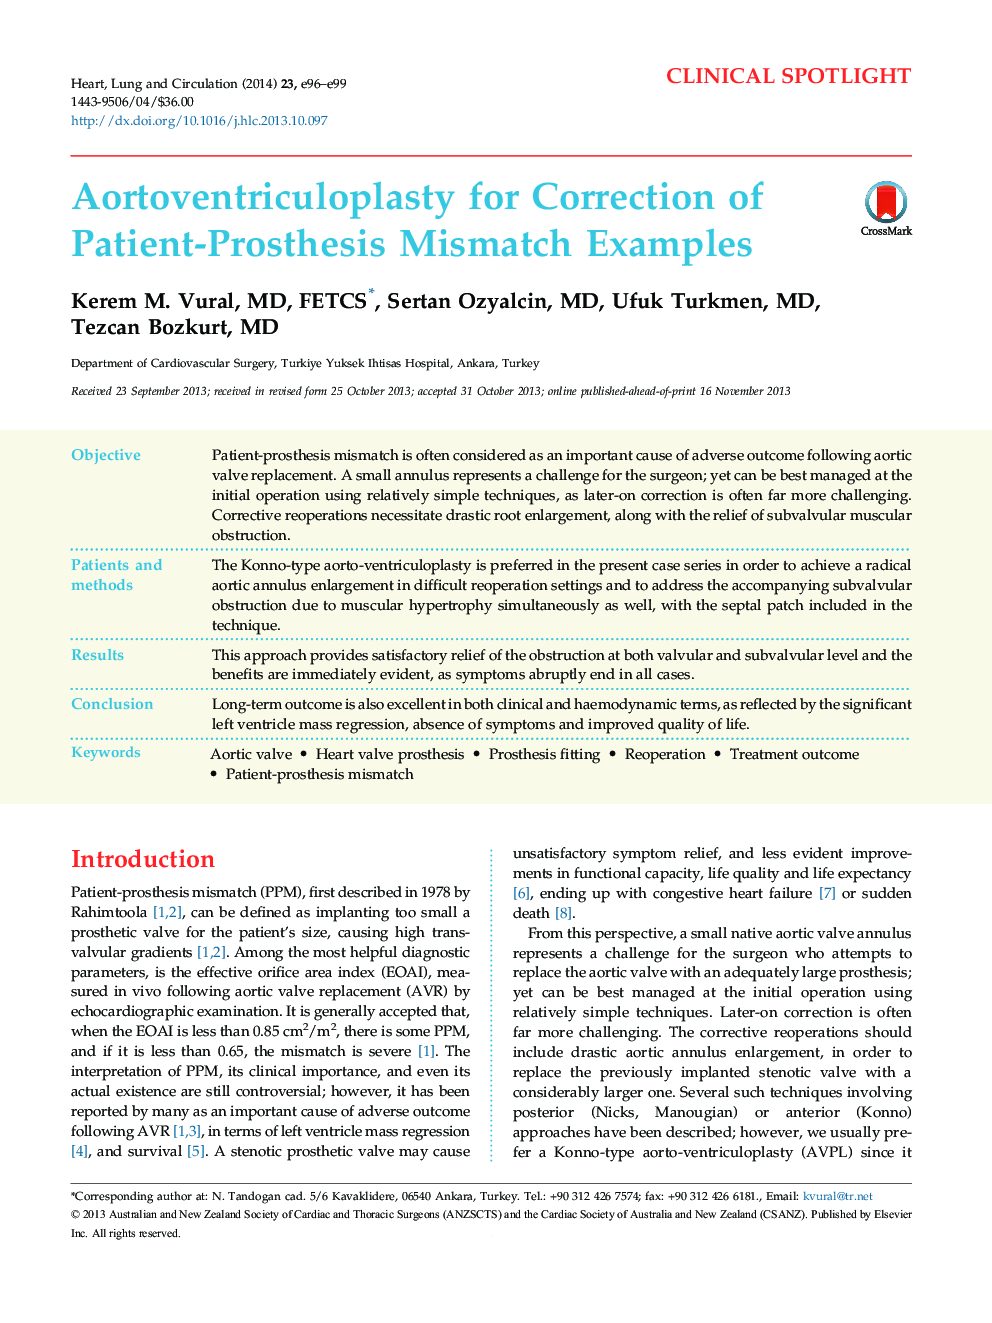 Aortoventriculoplasty for Correction of Patient-Prosthesis Mismatch Examples